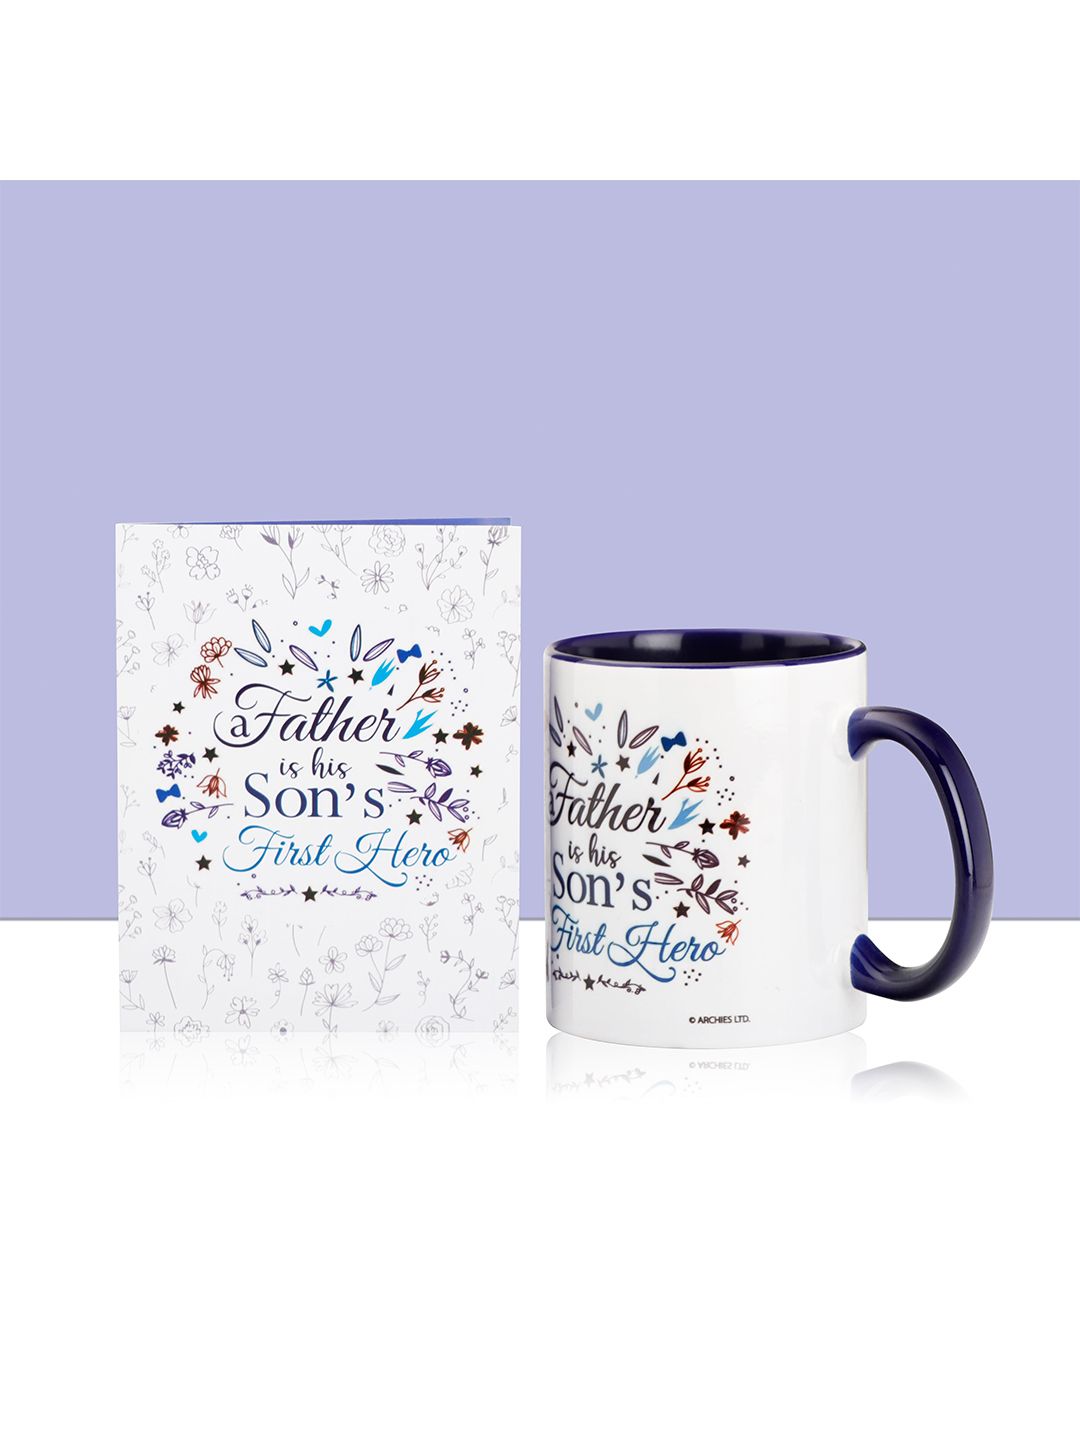 Archies Blue & White Text or Slogans Printed Ceramic Glossy Mugs with Greeting Card Price in India